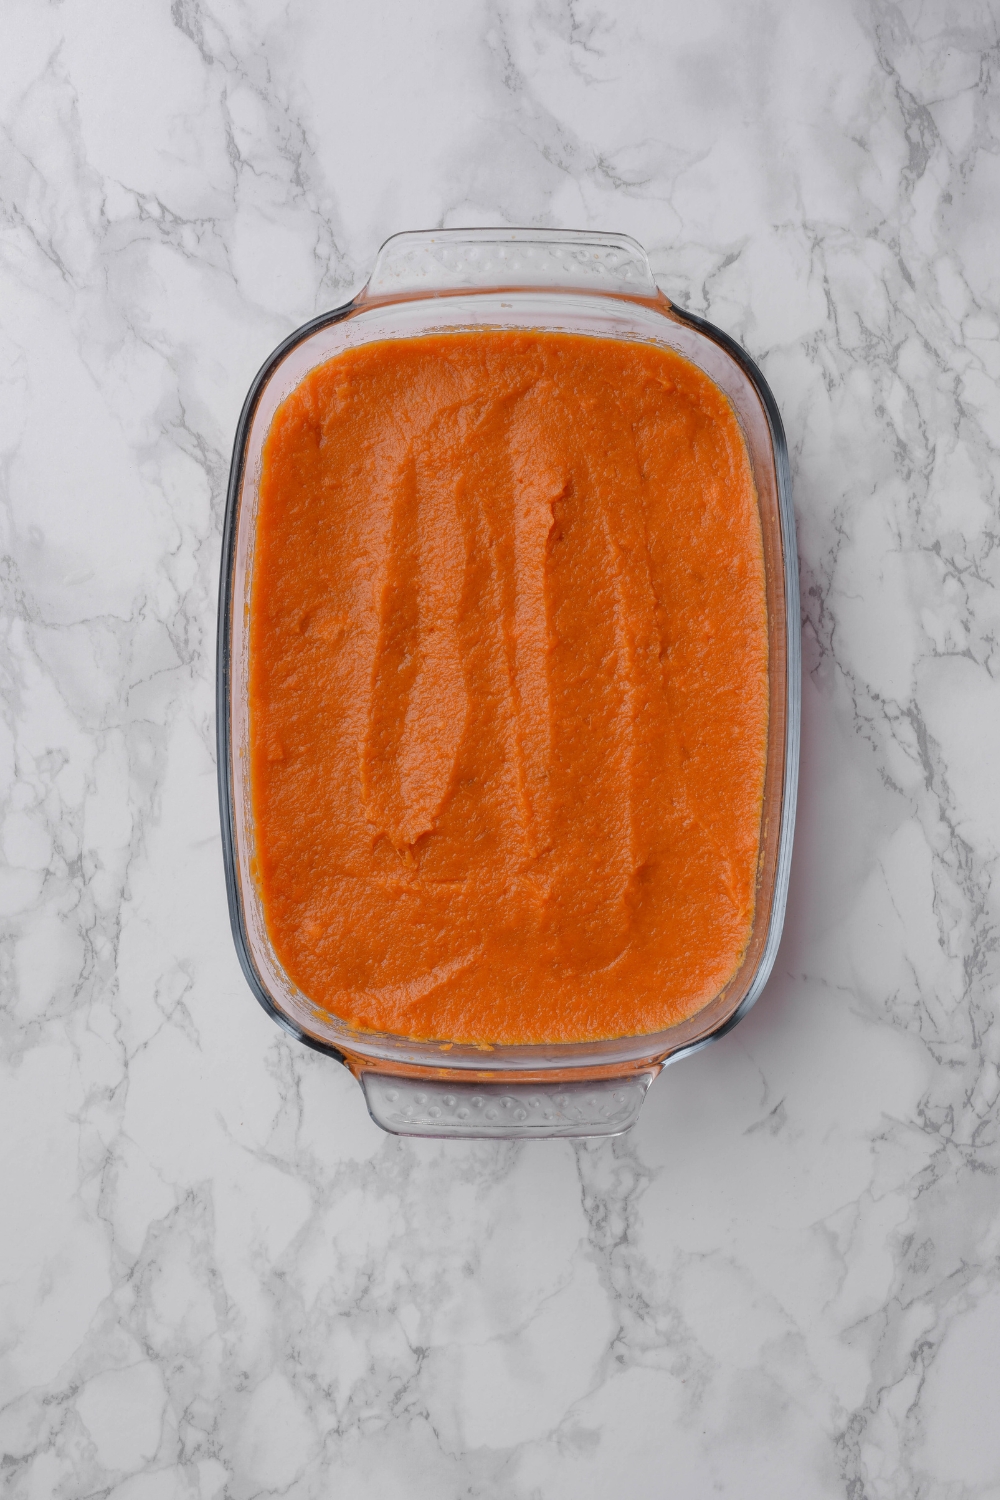 A clear baking dish filled with sweet potato puree that has been spread into an even layer.